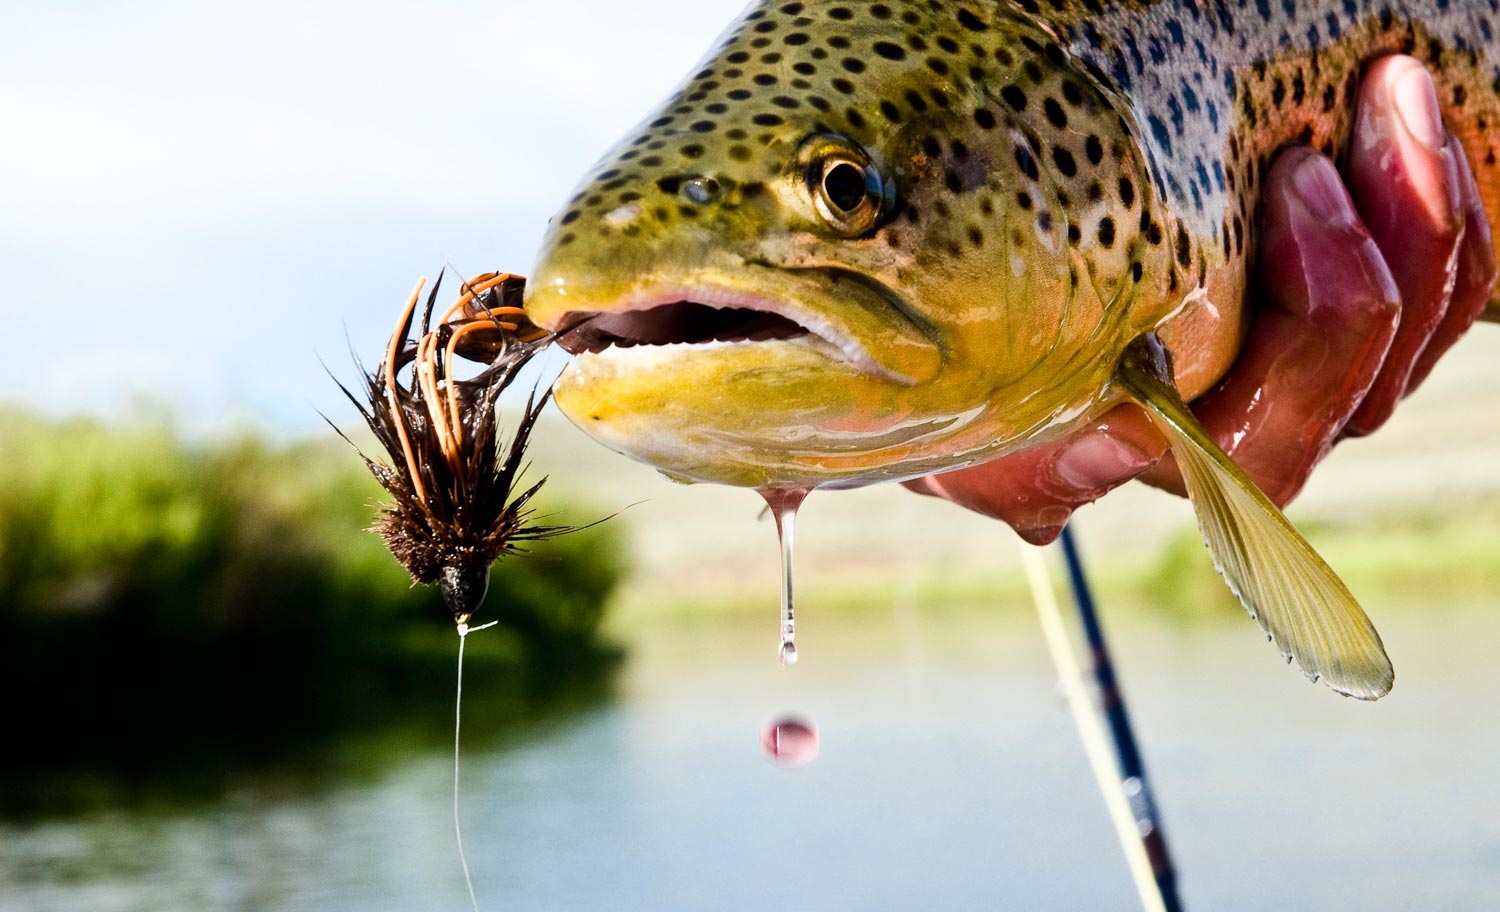 streamer fishing - Fly Fishing, Gink and Gasoline, How to Fly Fish, Trout Fishing, Fly Tying